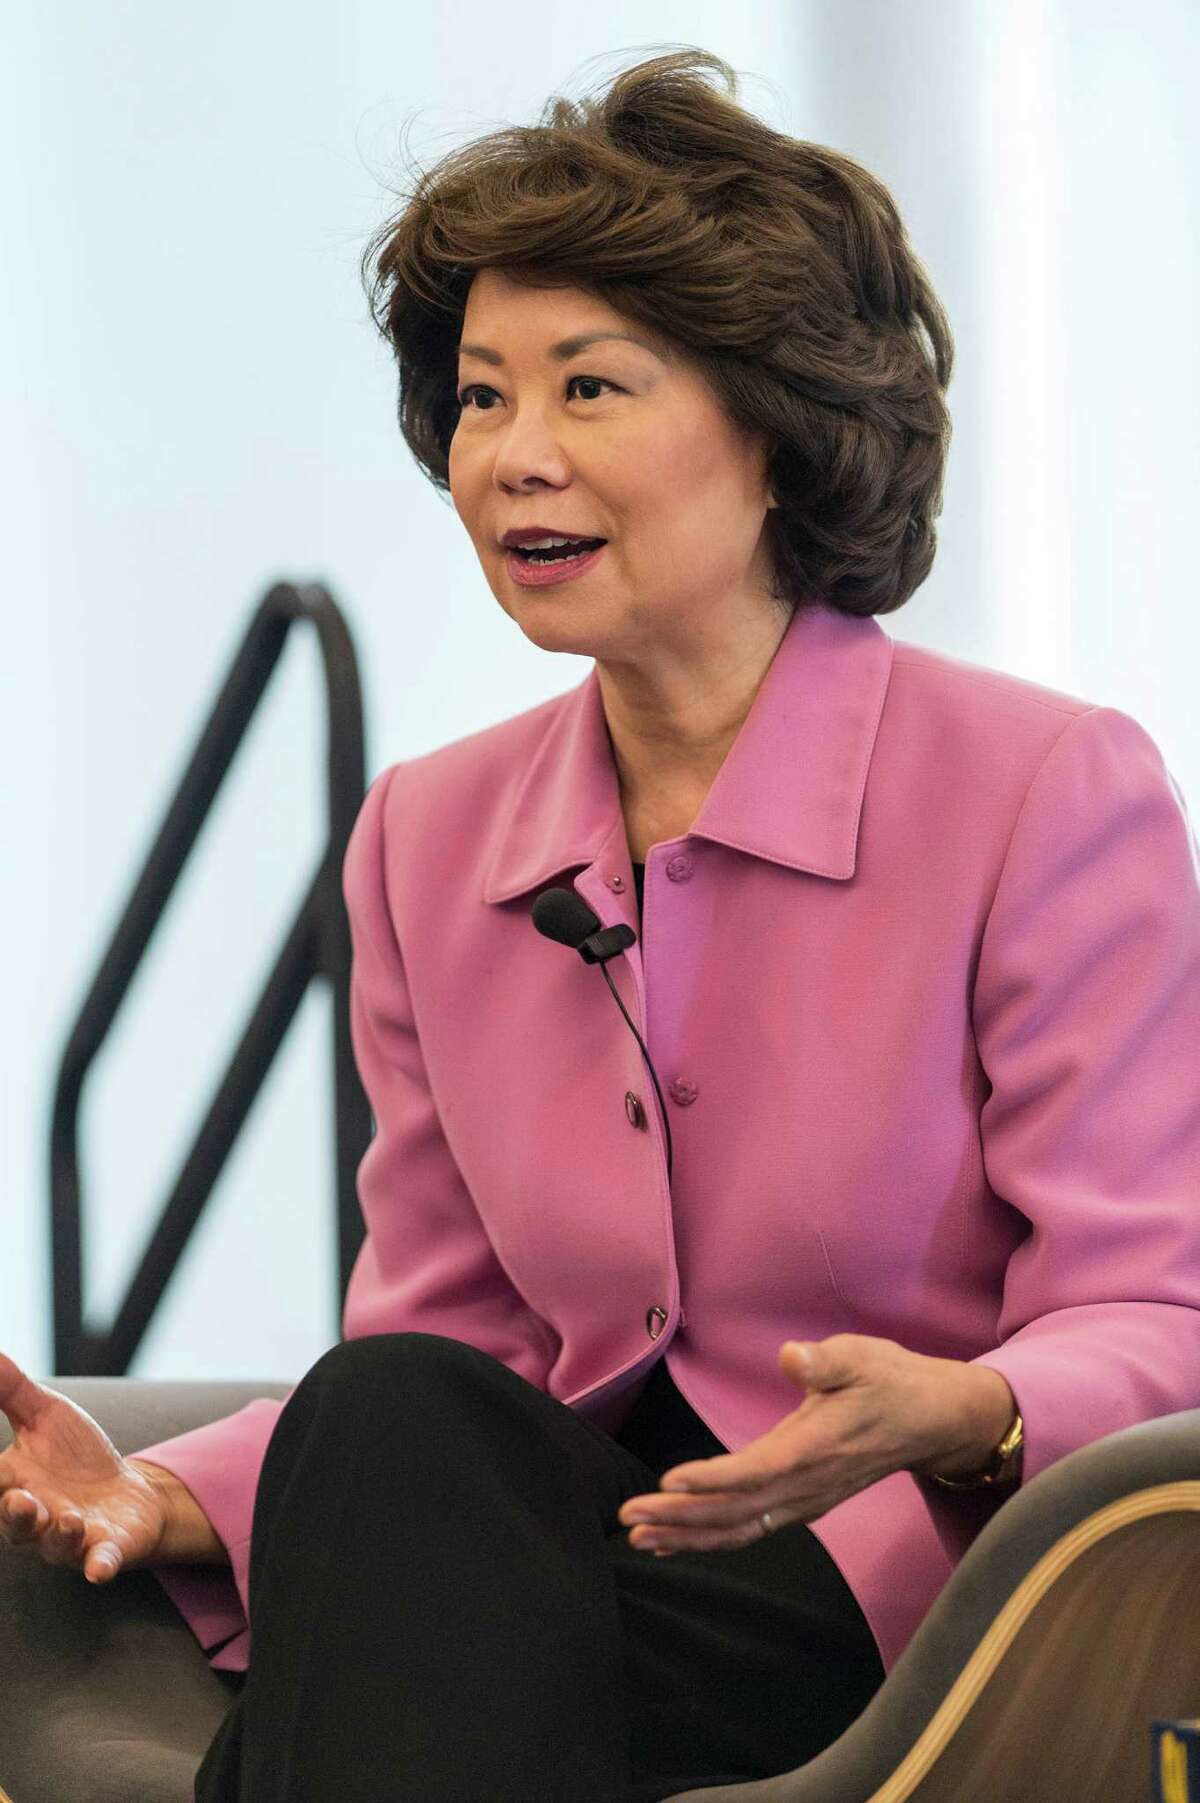 Elaine L. Chao, former U.S. Secretary of Labor, talks with Linda McMahon as part of an ongoing series, “Women Can Have it All,” at Sacred Heart University, Fairfield, Conn. on Thursday, March 31, 2016.